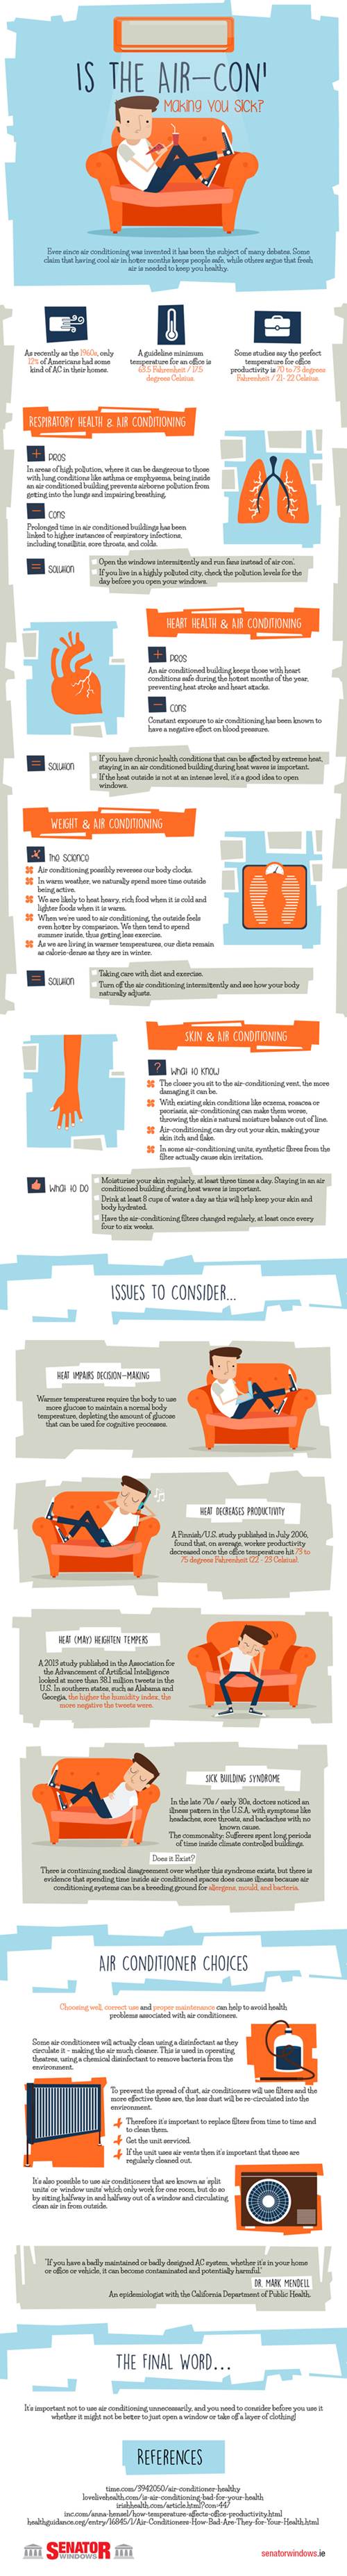 Air Conditioning & Your Health – Infographic (1)